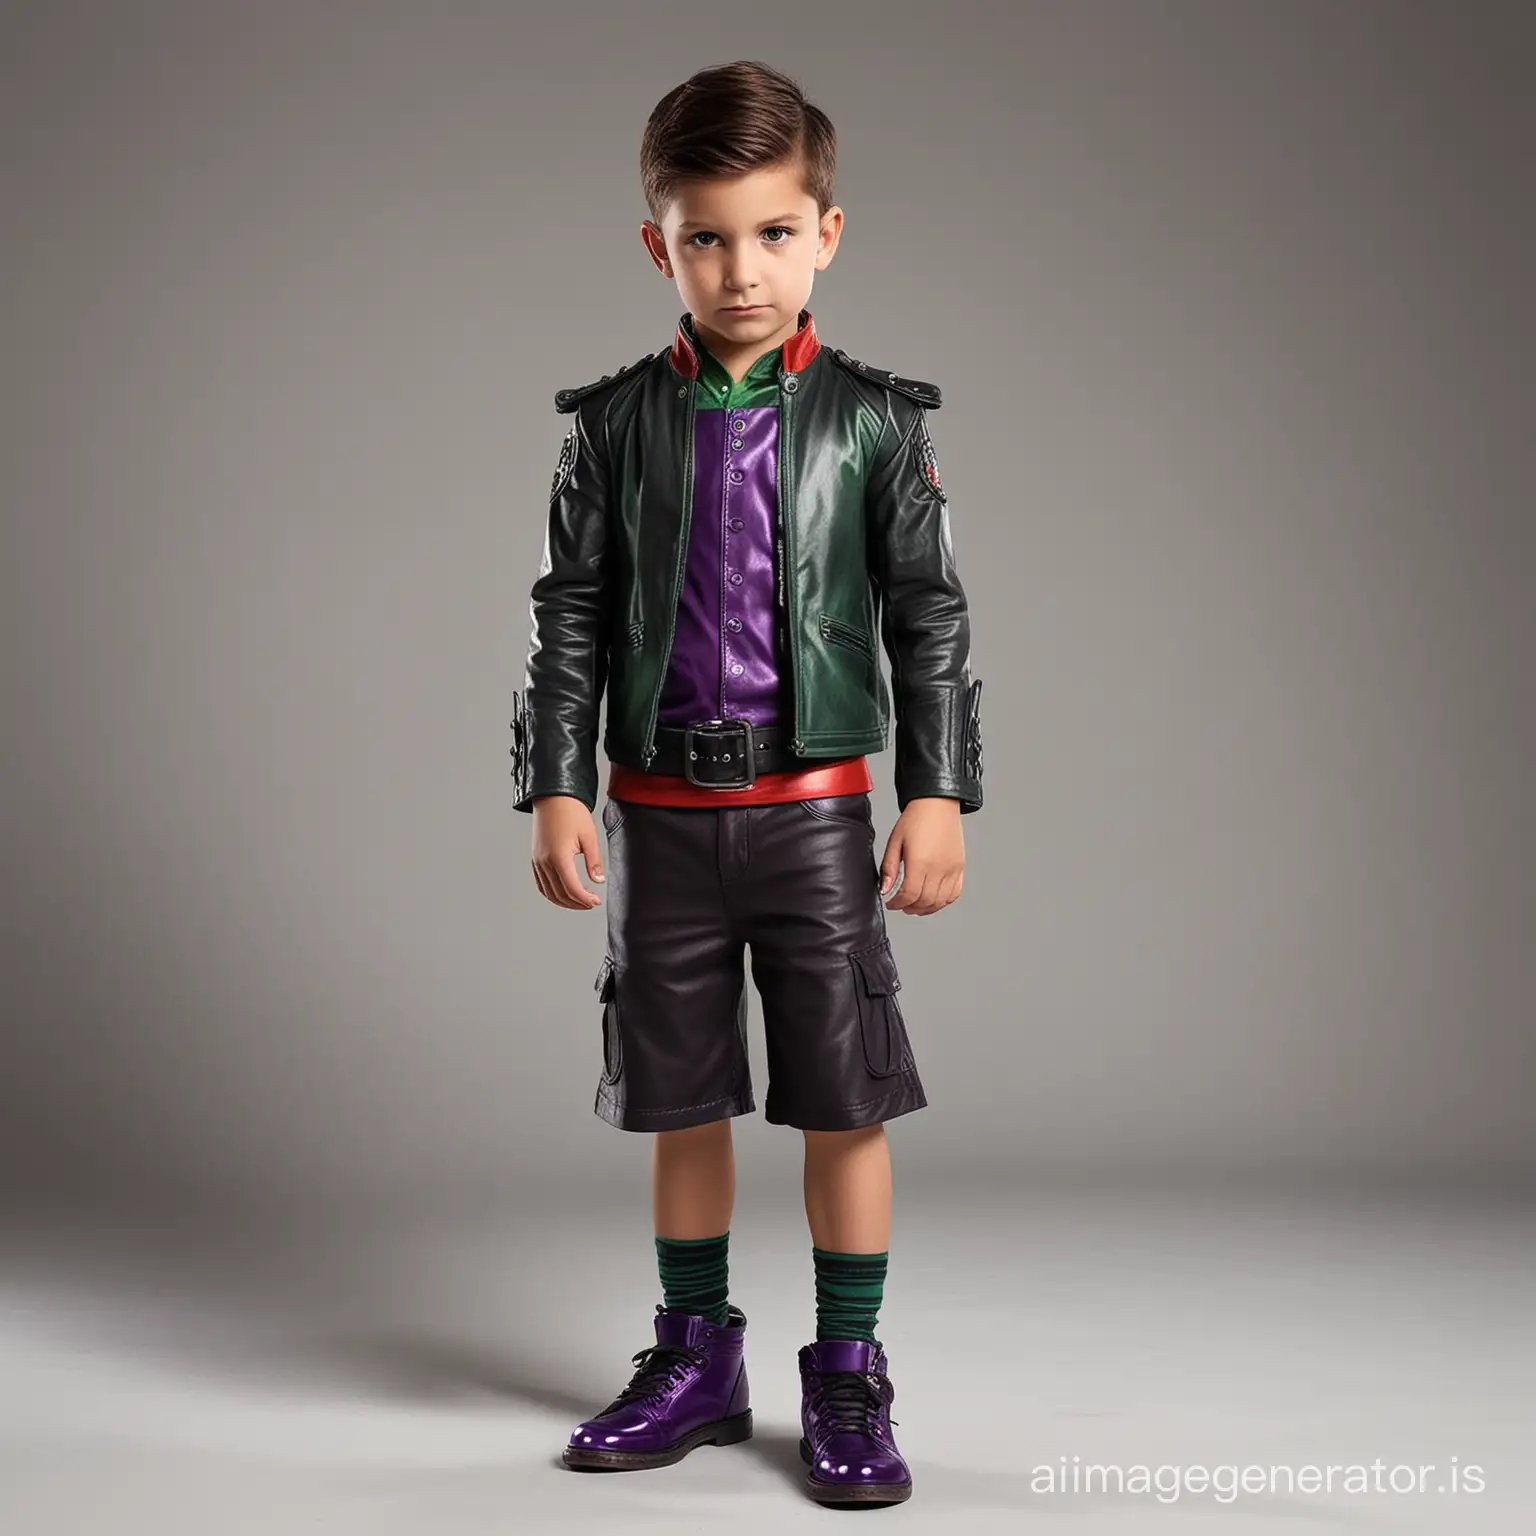 Intimidating-8YearOld-Boy-Villain-in-Stylish-Purple-Leather-Outfit